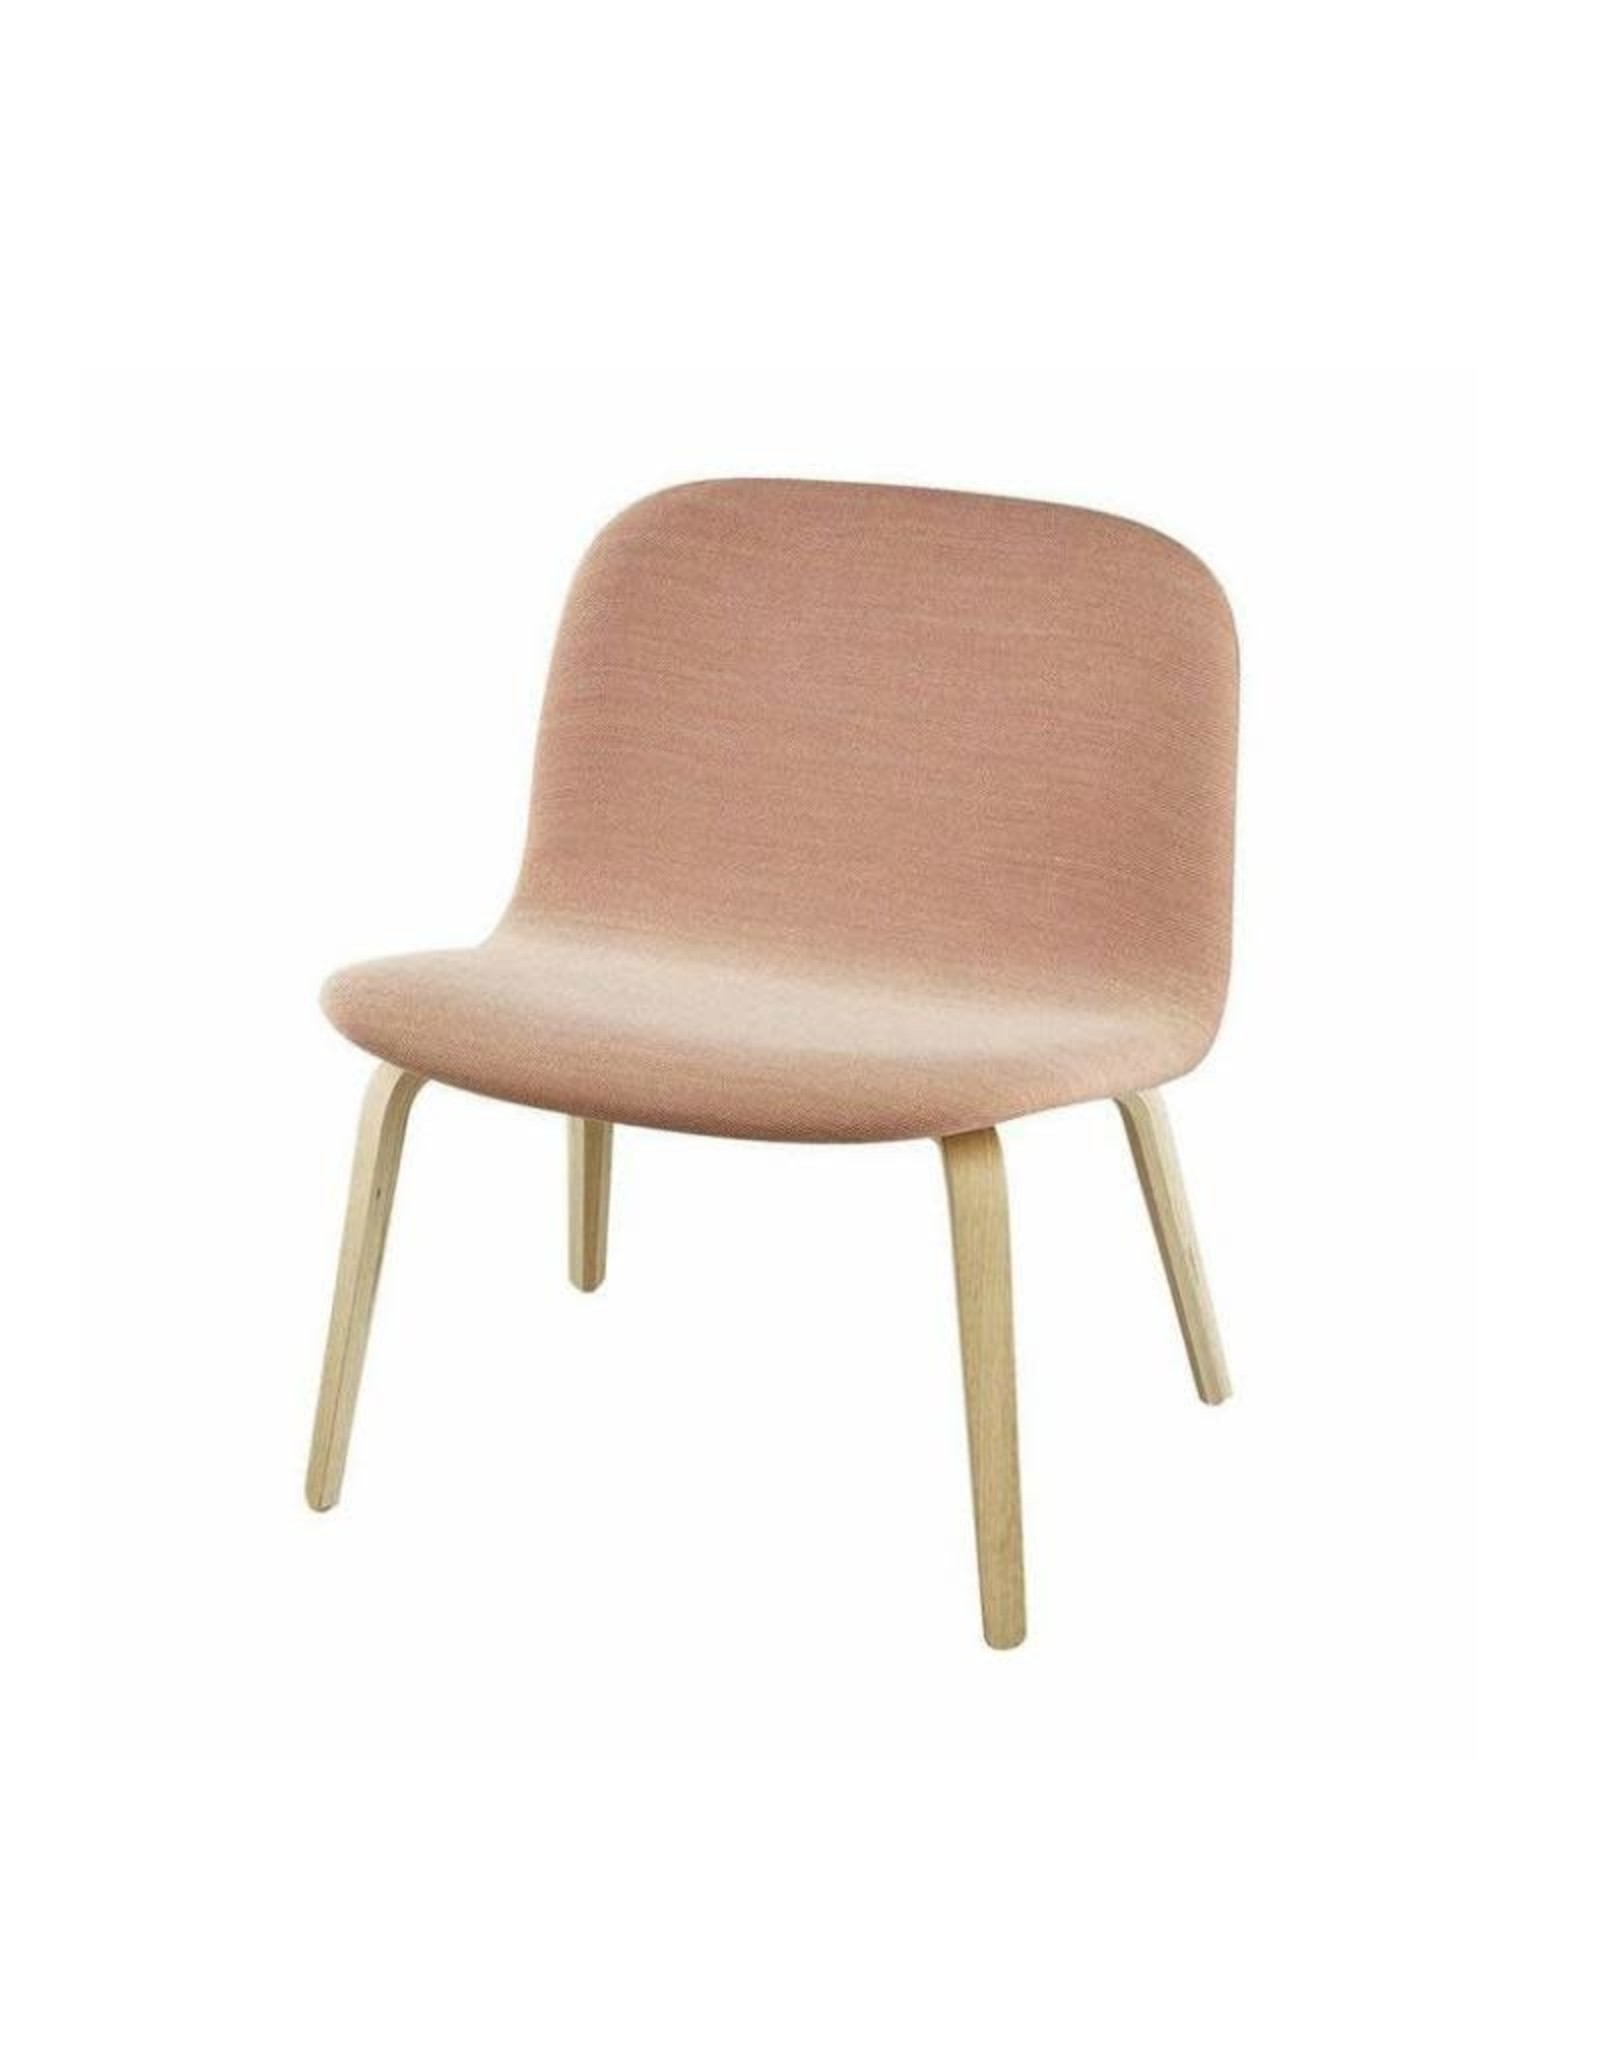 (SHOWROOM ITEM) VISU LOUNGE CHAIR SHELL UPHOLSTERED IN PINK